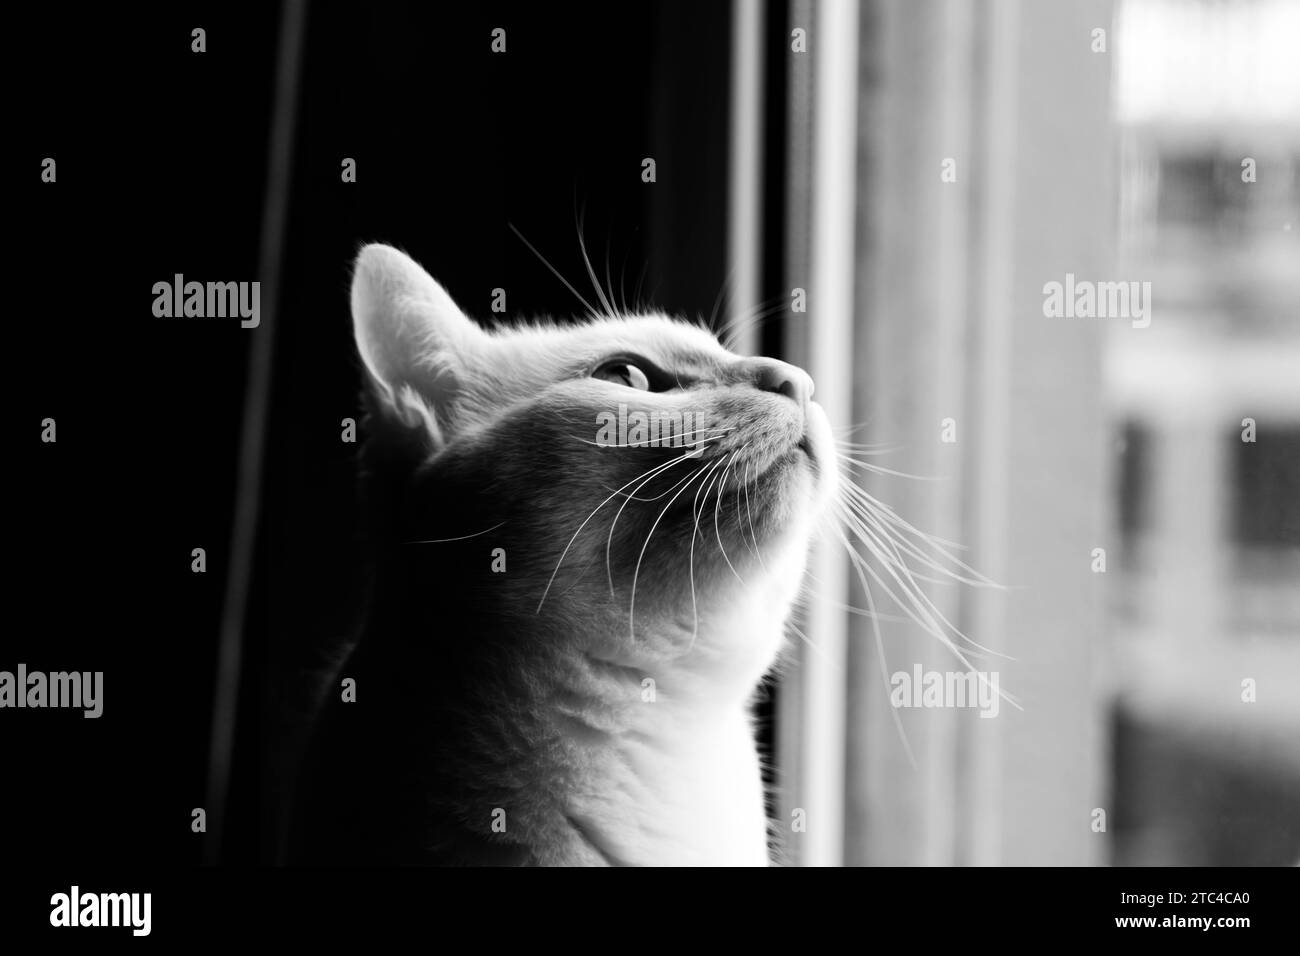 White cat by the window, bathed in black and white light. A scene of tranquility and elegance Stock Photo